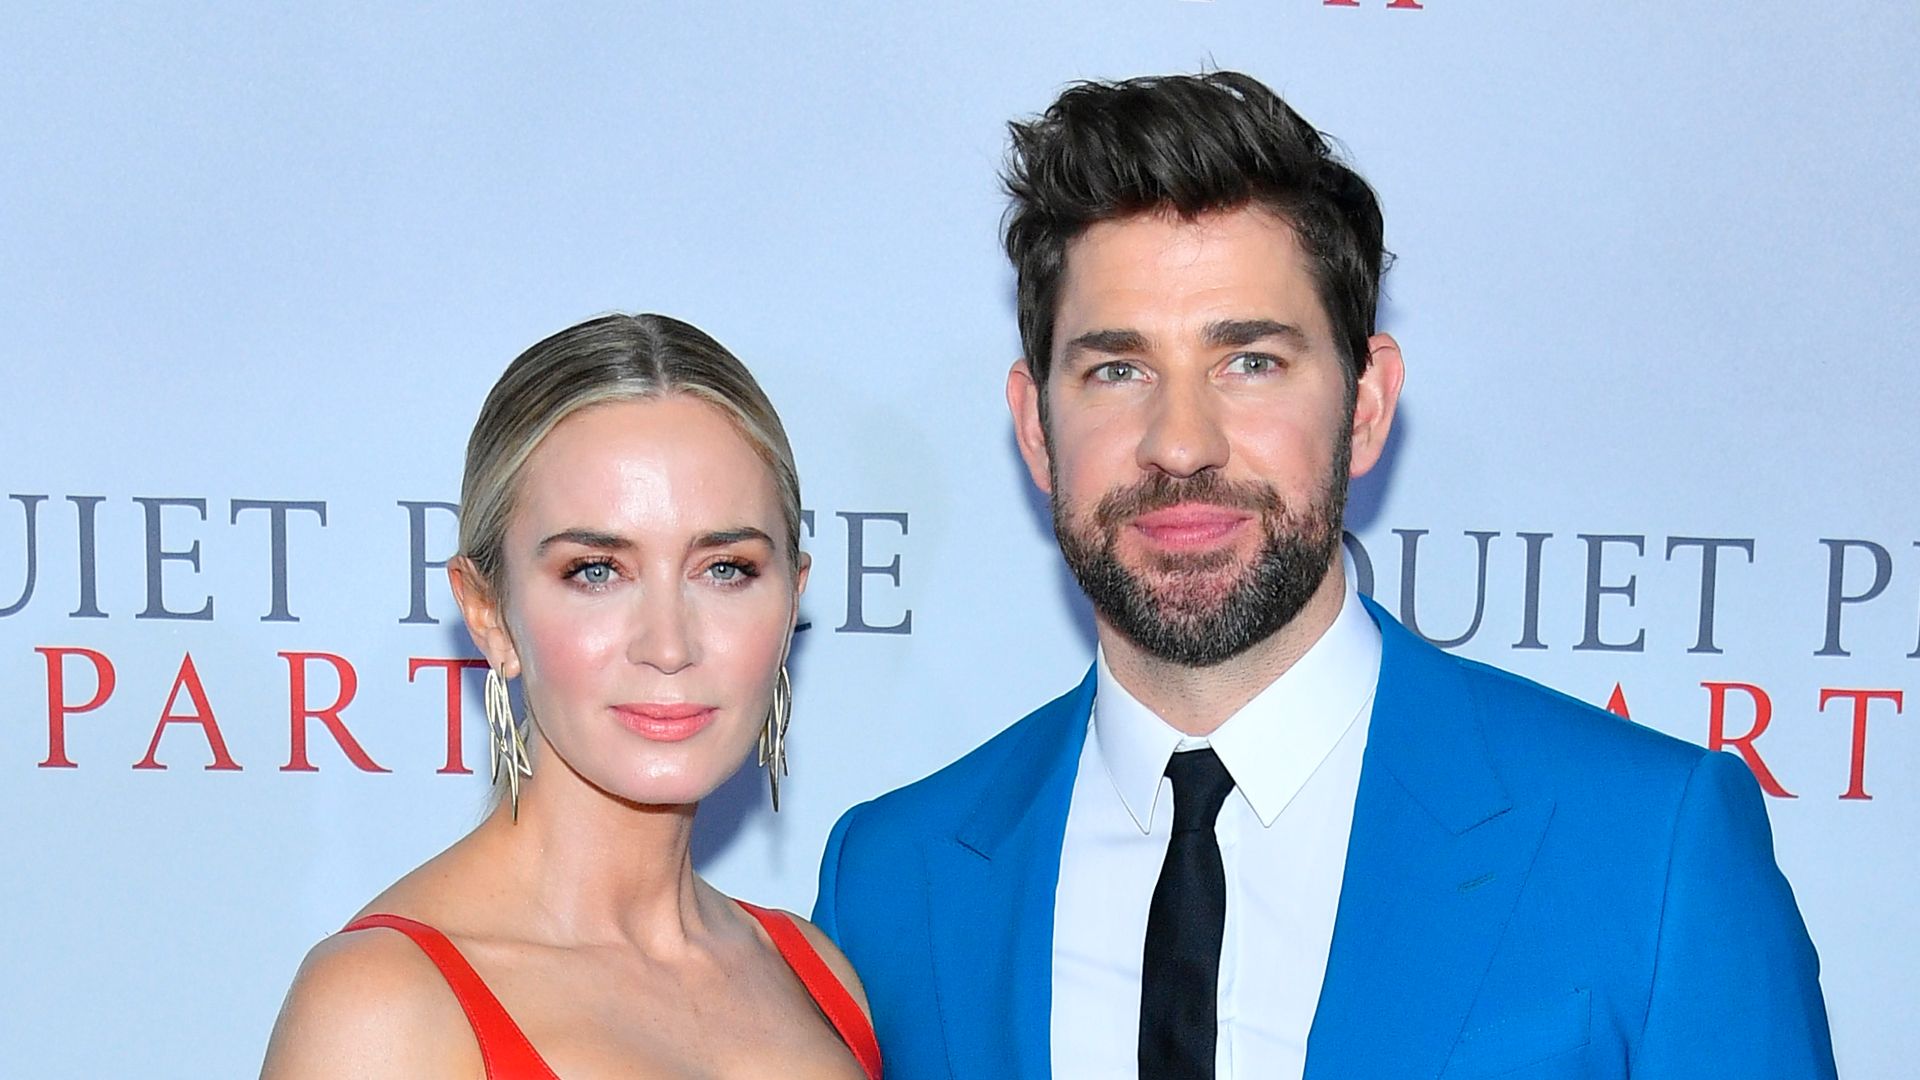 John Krasinski and Emily Blunt attend the World Premiere of "A Quiet Place Part II" presented by Paramount Pictures, at the Rose Theater at Jazz at Lincoln Center's Frederick P. Rose Hall on March 08, 2020 in New York, New York